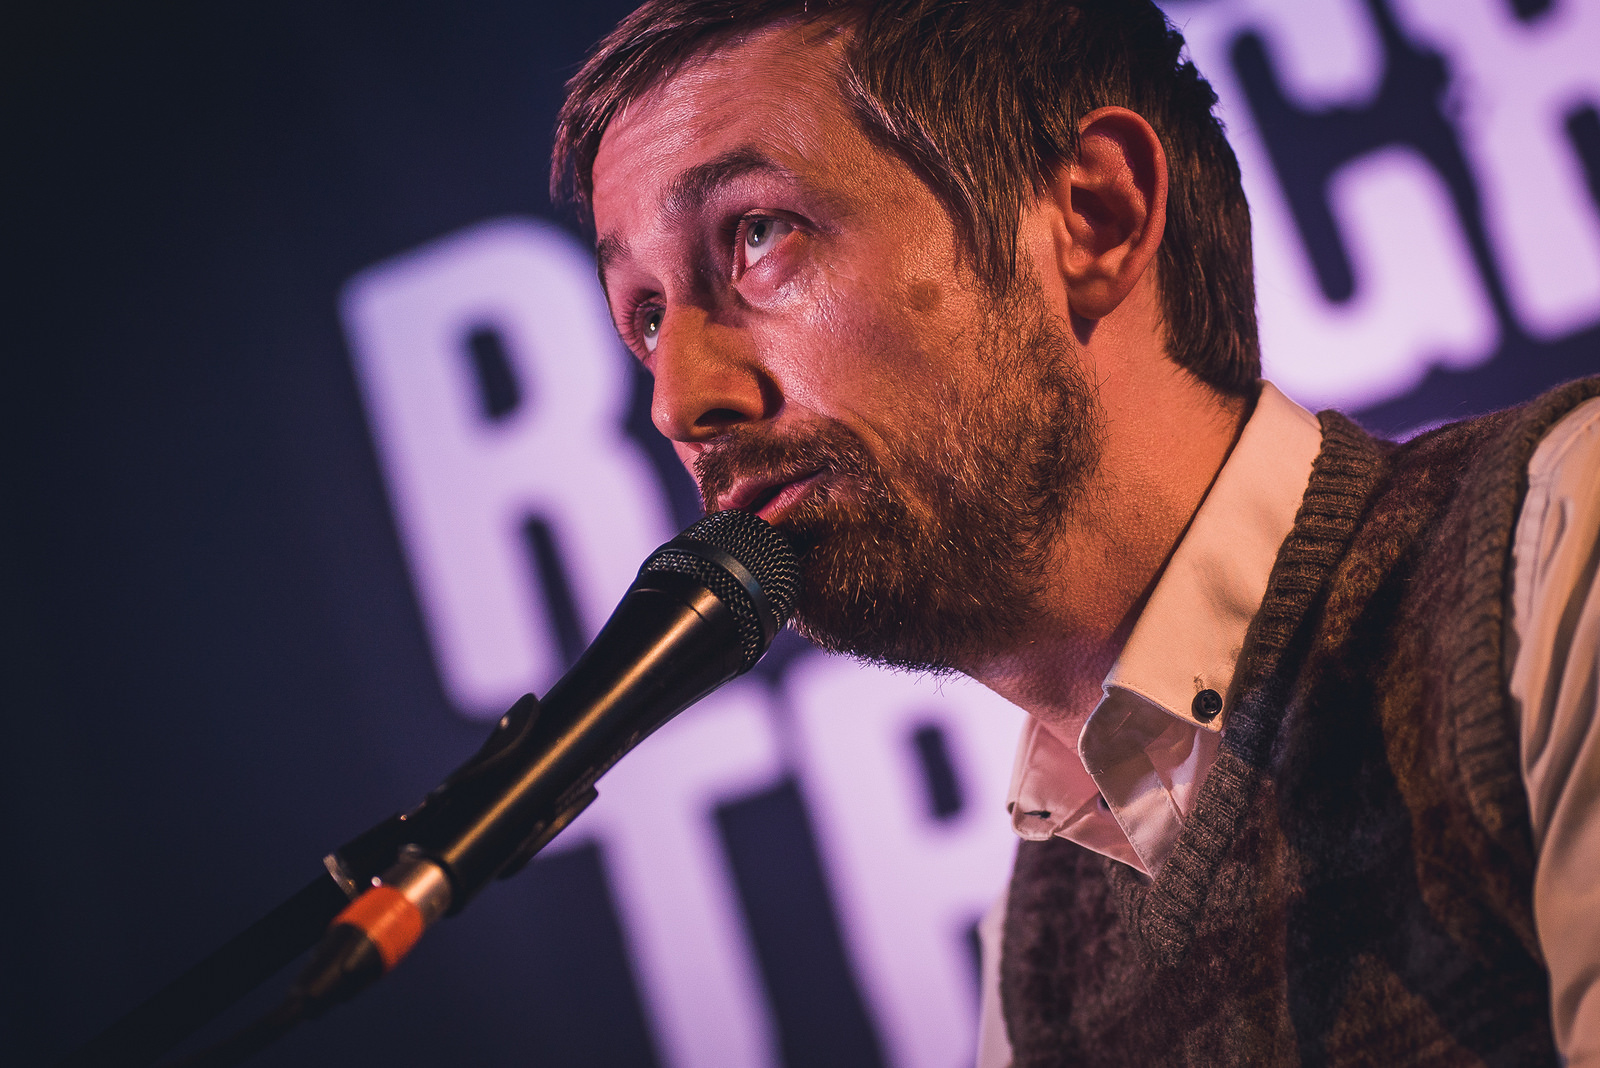 The Divine Comedy at Rough Trade